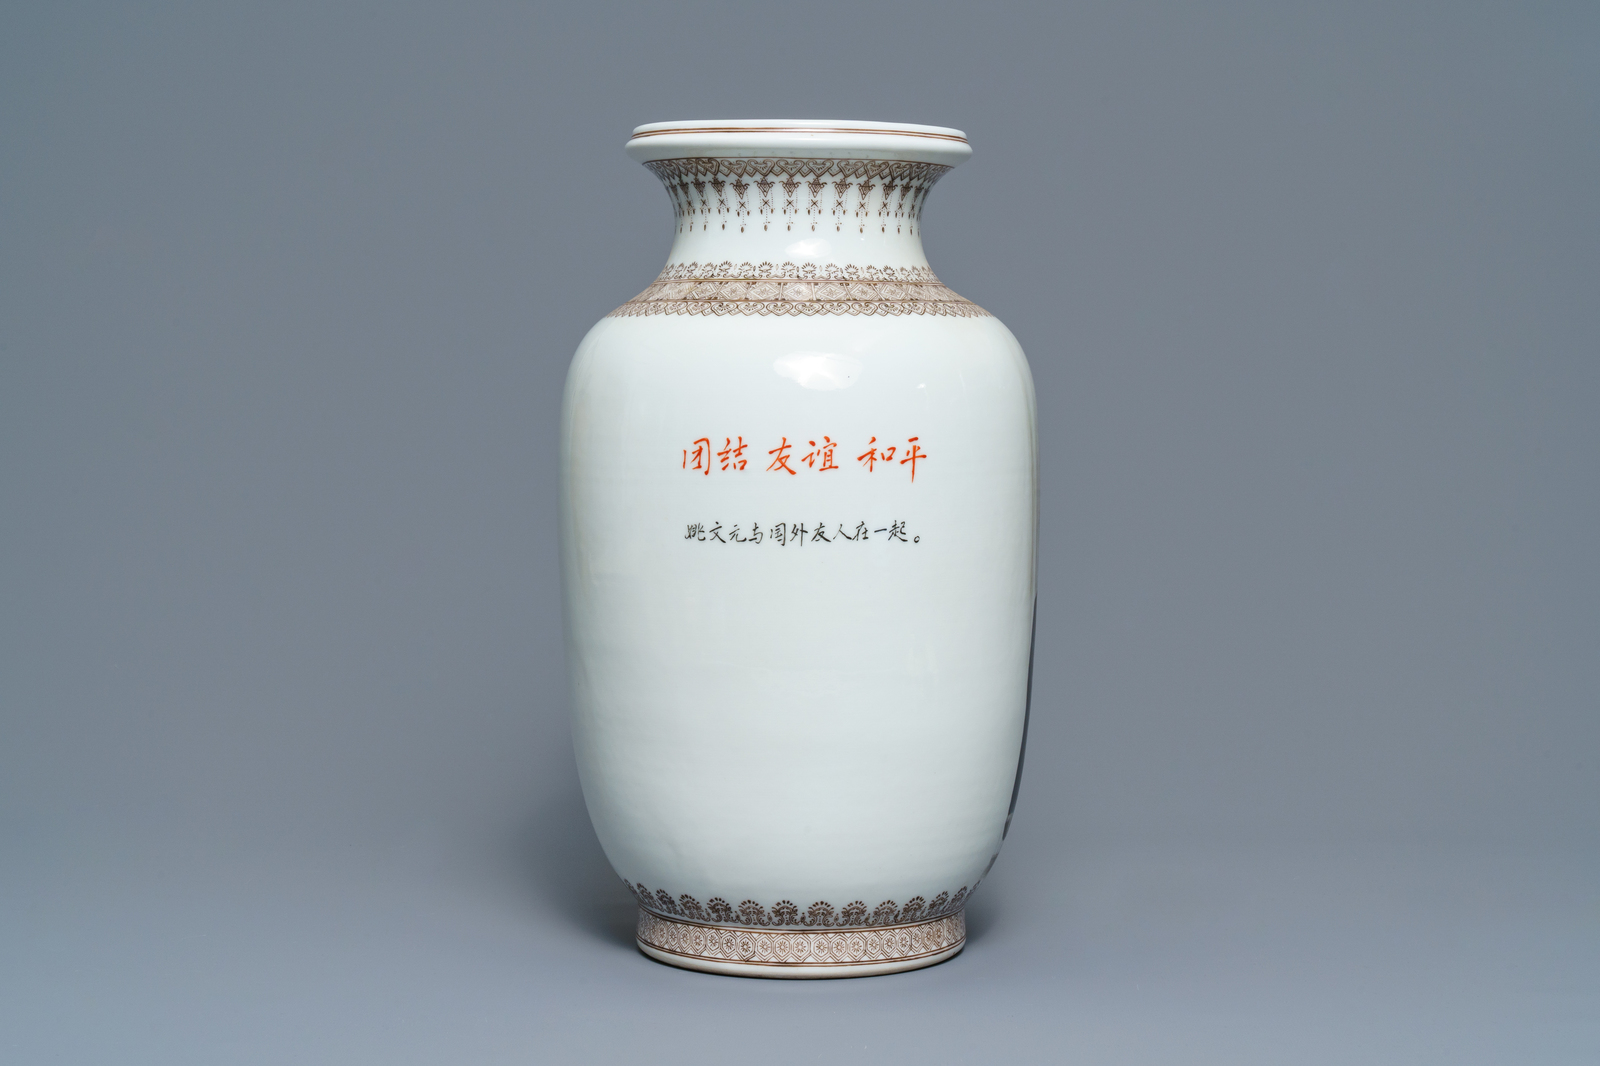 A Chinese Cultural Revolution vase depicting communism in Albania, 20th C. - Image 3 of 6